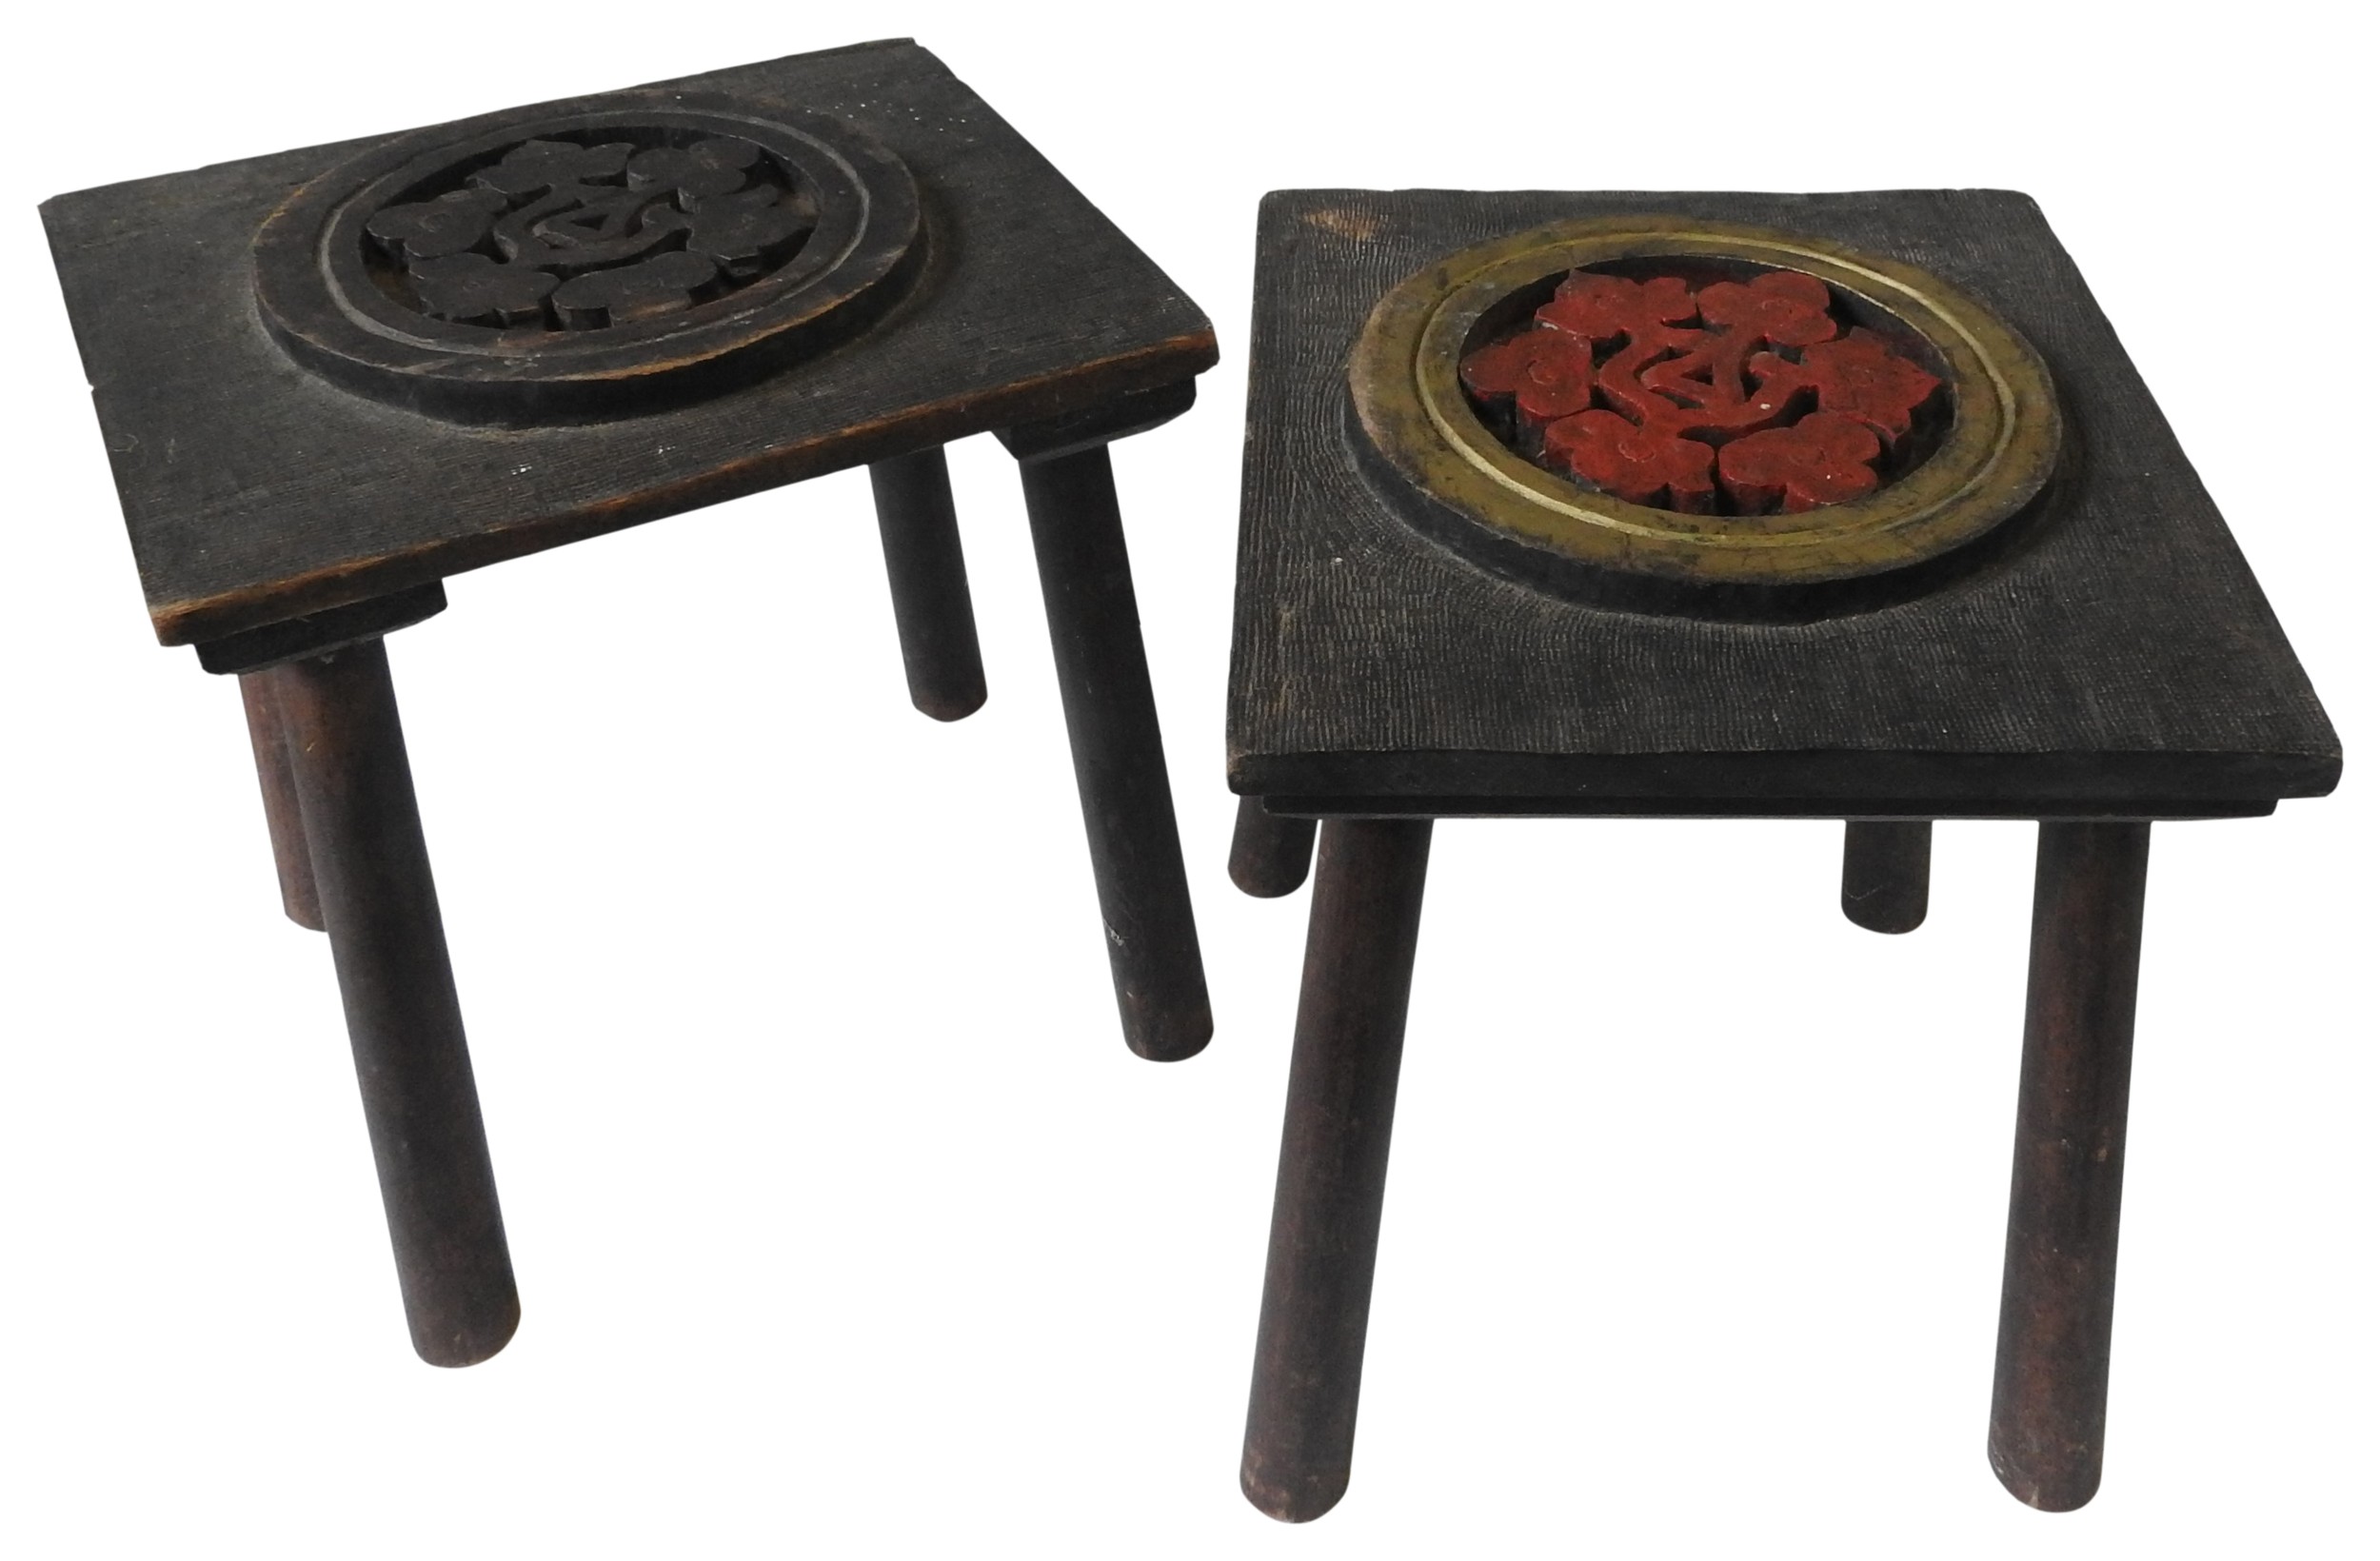 TWO SMALL CARVED INDIAN STOOLS, the seat panels decorated with carved lotus flower roundels, 28 x 24